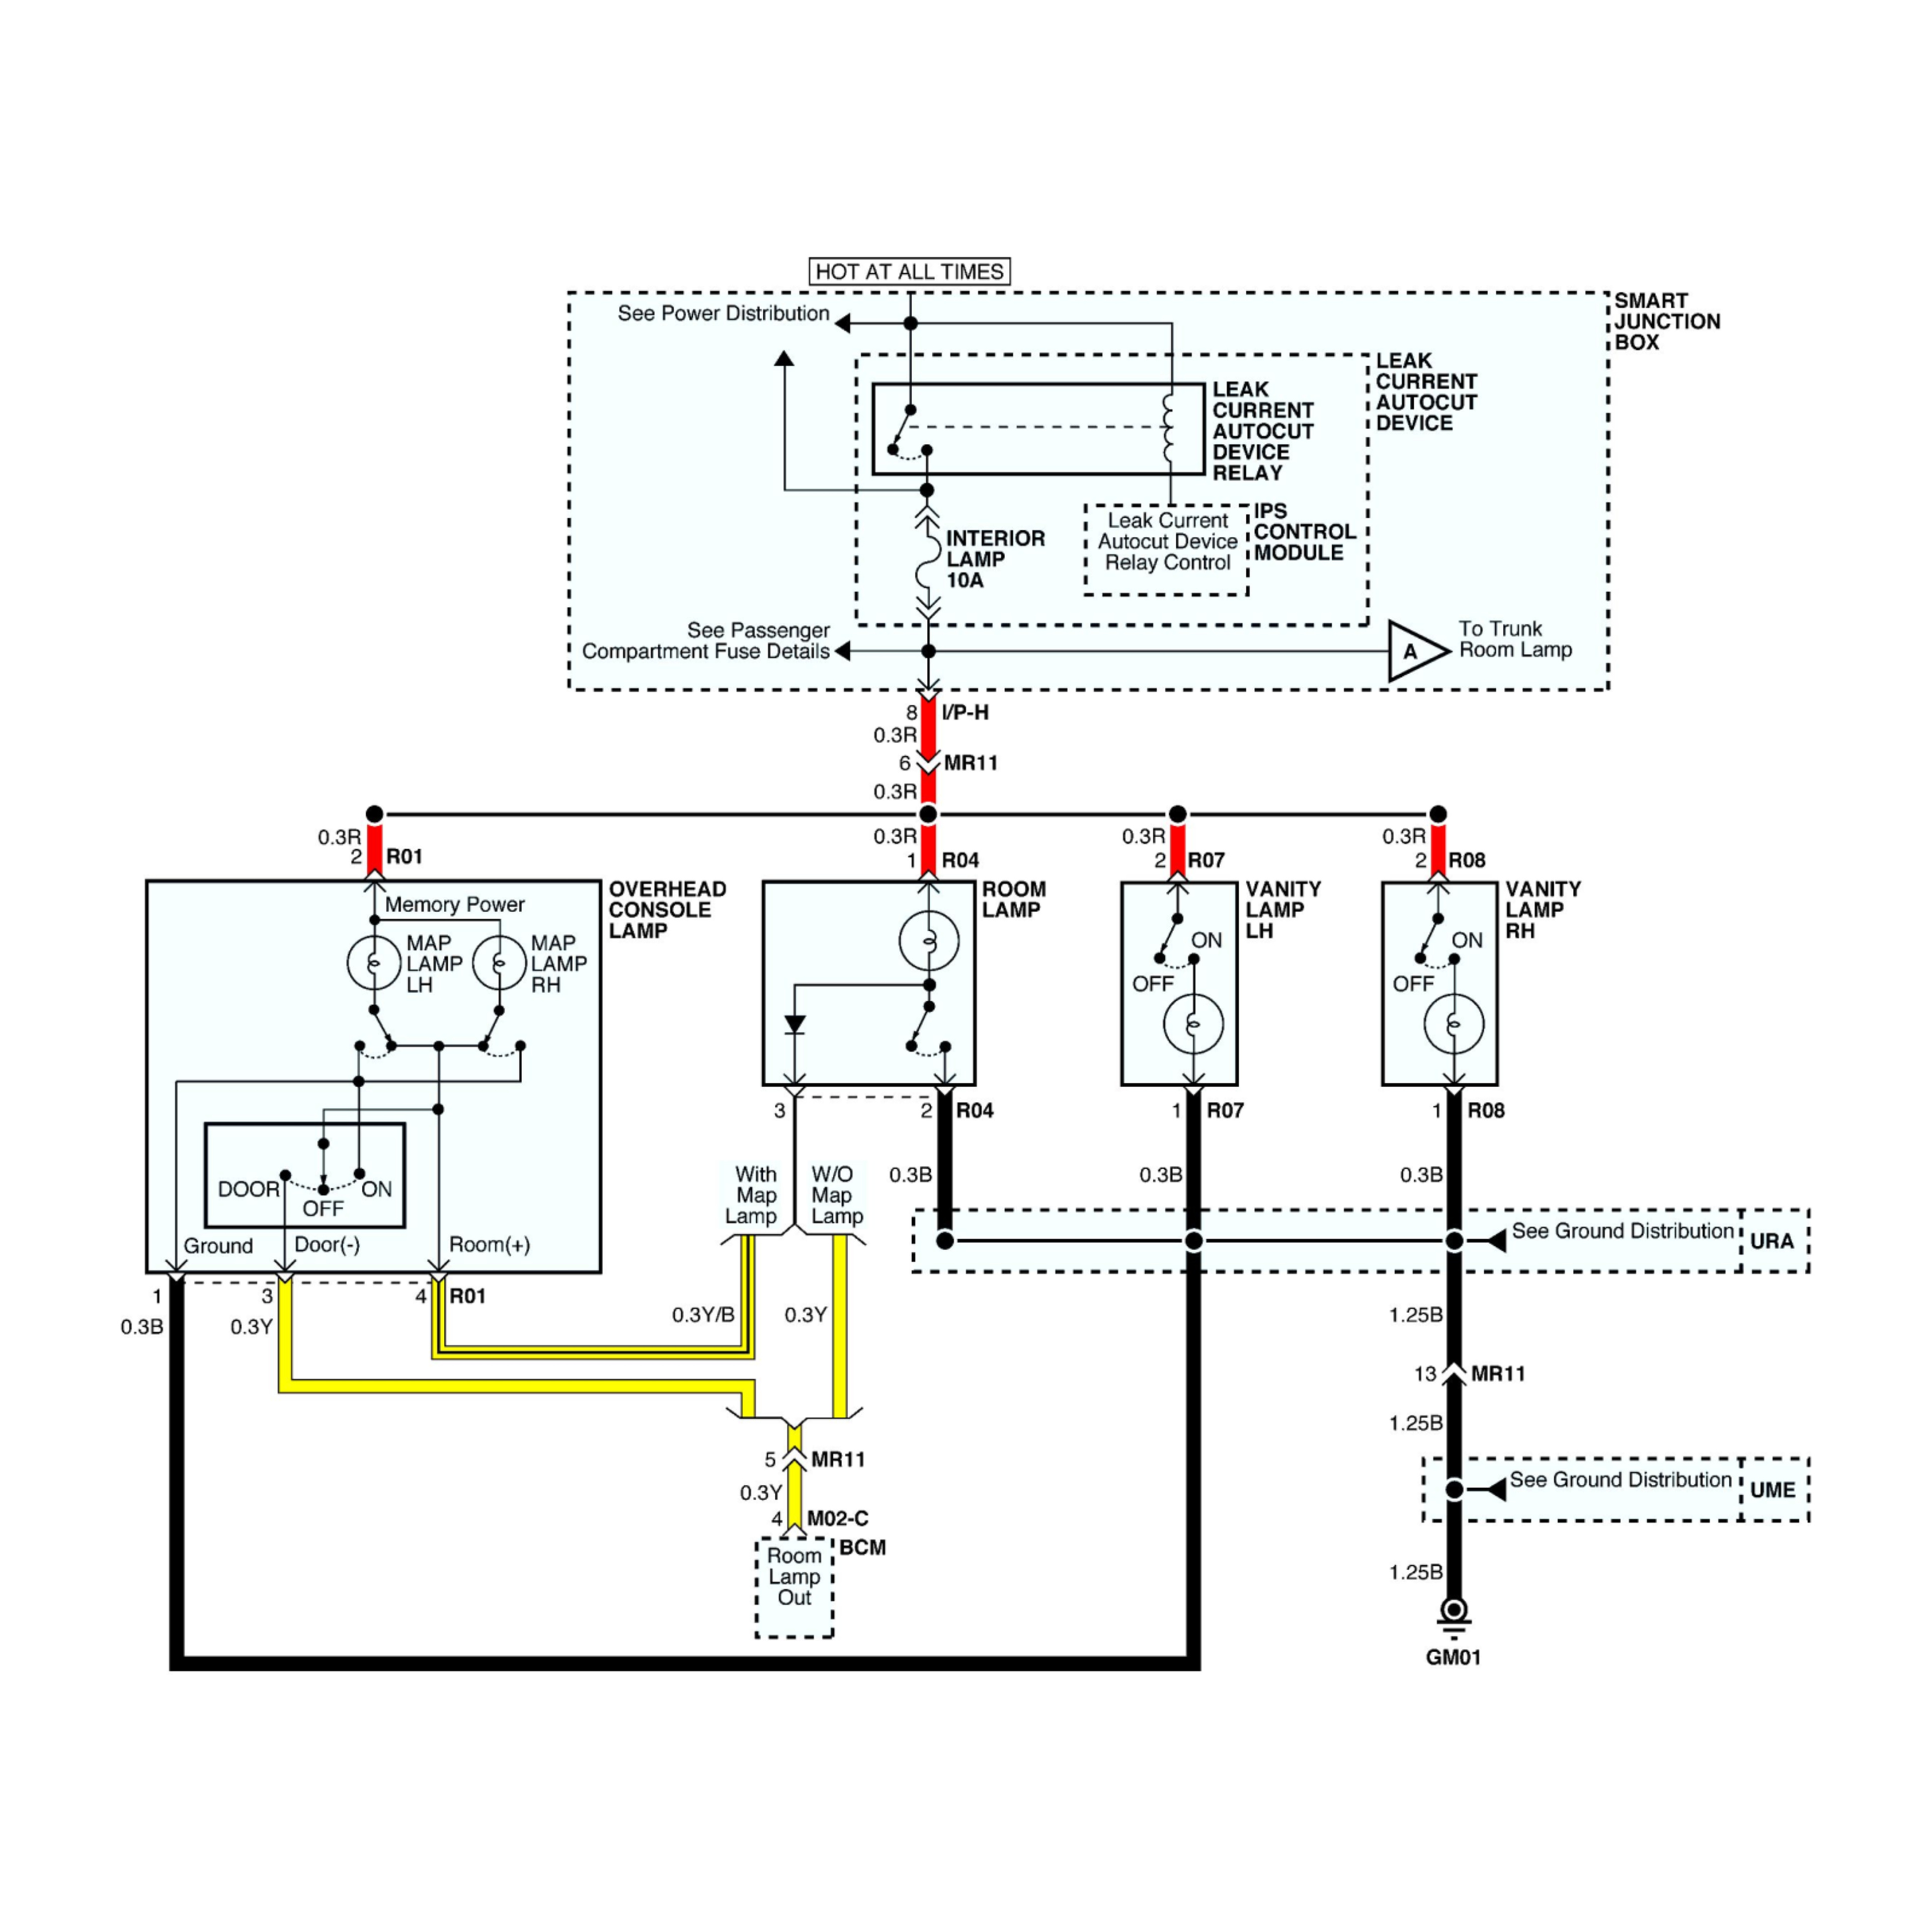 2014 Lincoln MKS wiring diagrams example